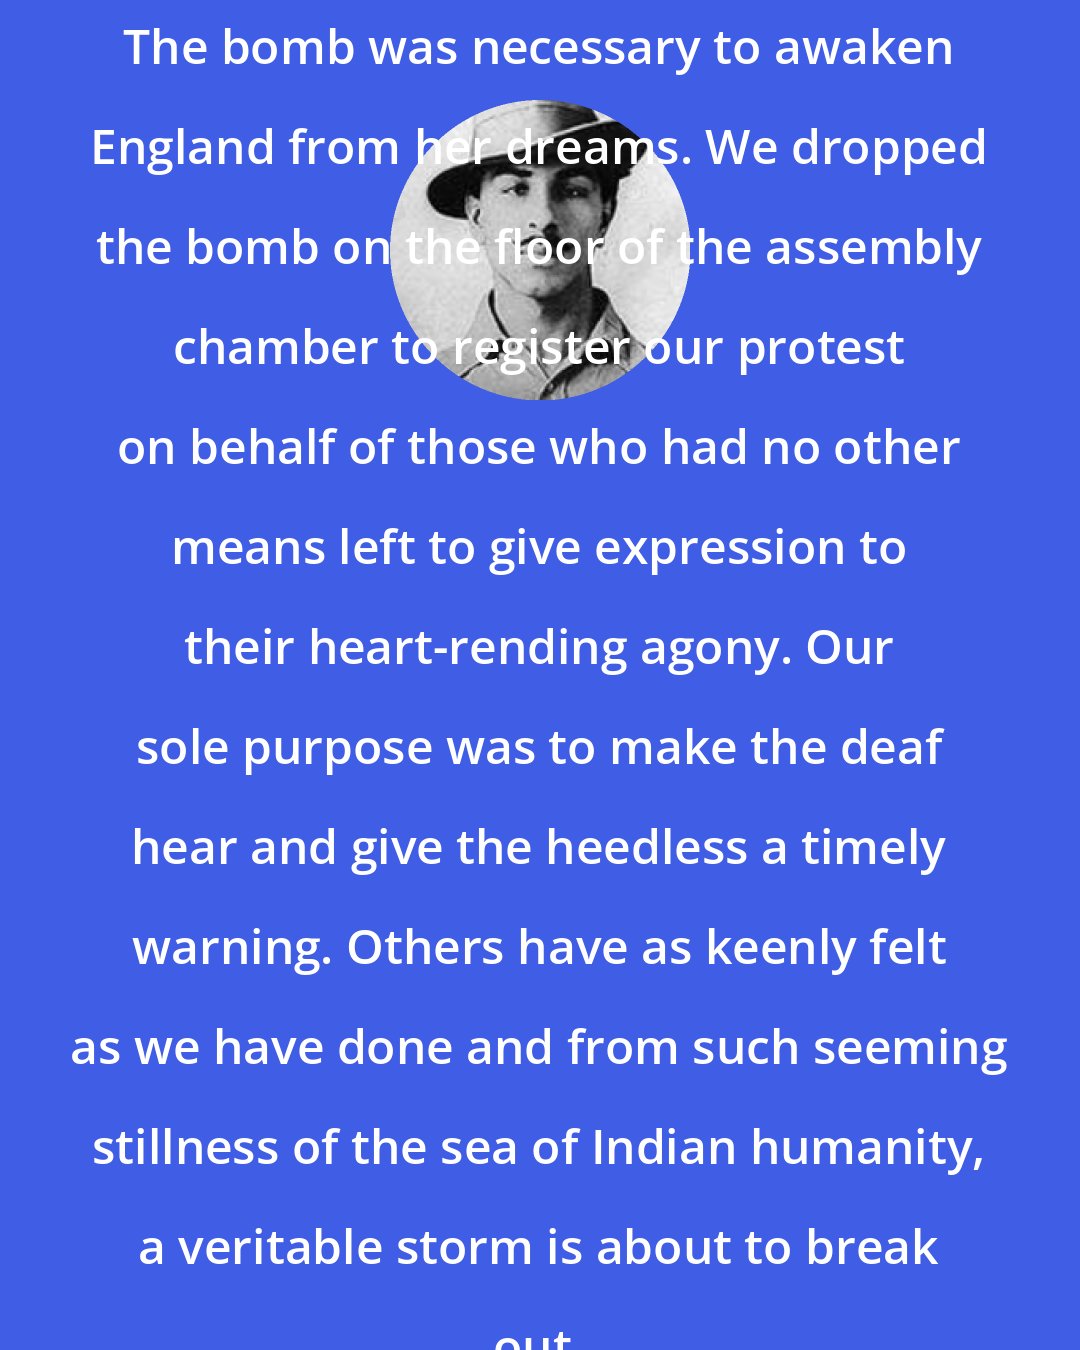 Bhagat Singh: The bomb was necessary to awaken England from her dreams. We dropped the bomb on the floor of the assembly chamber to register our protest on behalf of those who had no other means left to give expression to their heart-rending agony. Our sole purpose was to make the deaf hear and give the heedless a timely warning. Others have as keenly felt as we have done and from such seeming stillness of the sea of Indian humanity, a veritable storm is about to break out.